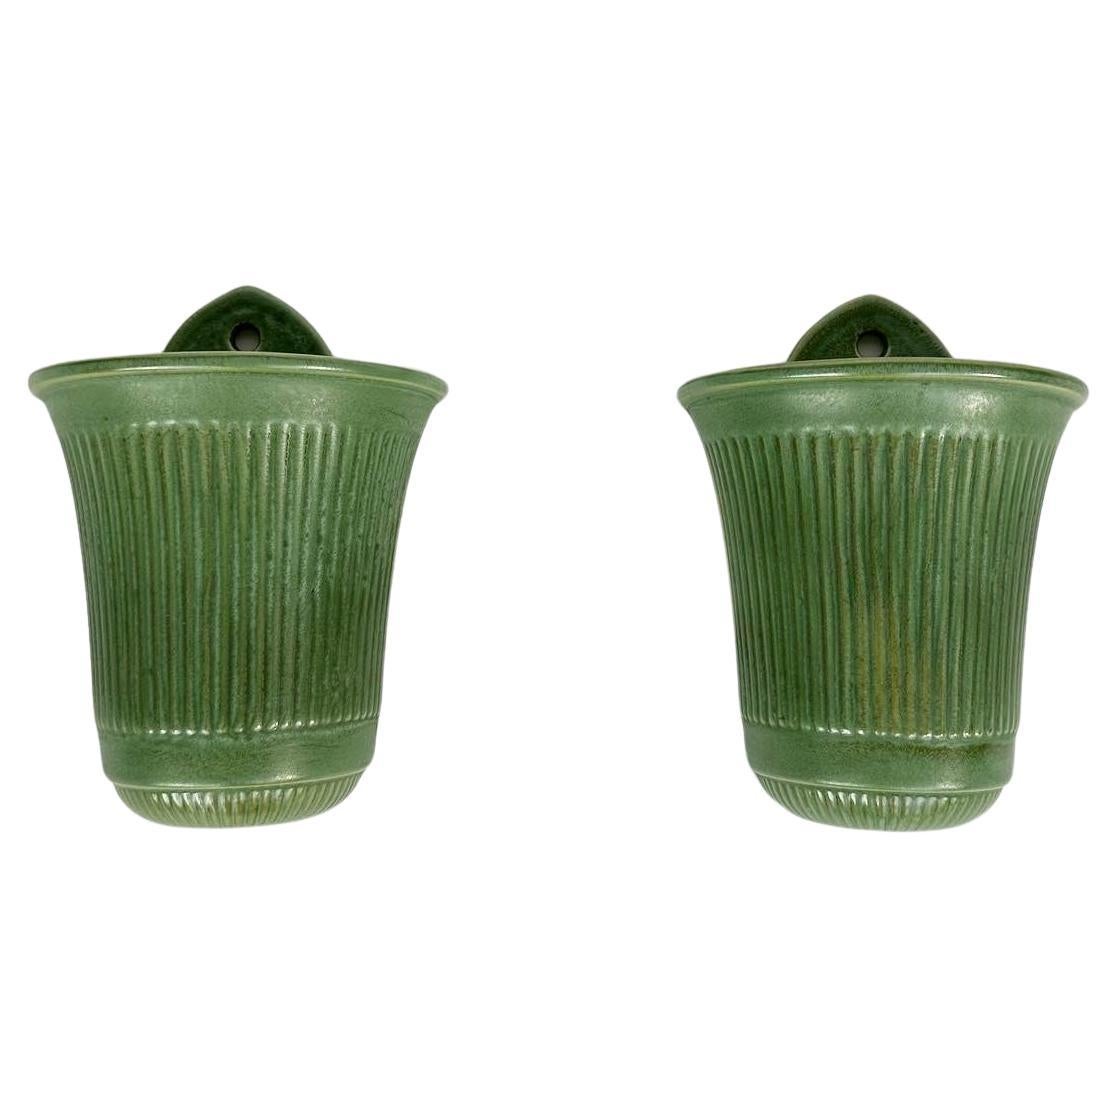 Rare pair of Arthur Percy wall vases for Gefle ceramics in Sweden, designed around 1936.

This model appears first in the 1936 Gefle product catalogue, shown in last photo.

They come with the original ceramic insert for perfectly arranged